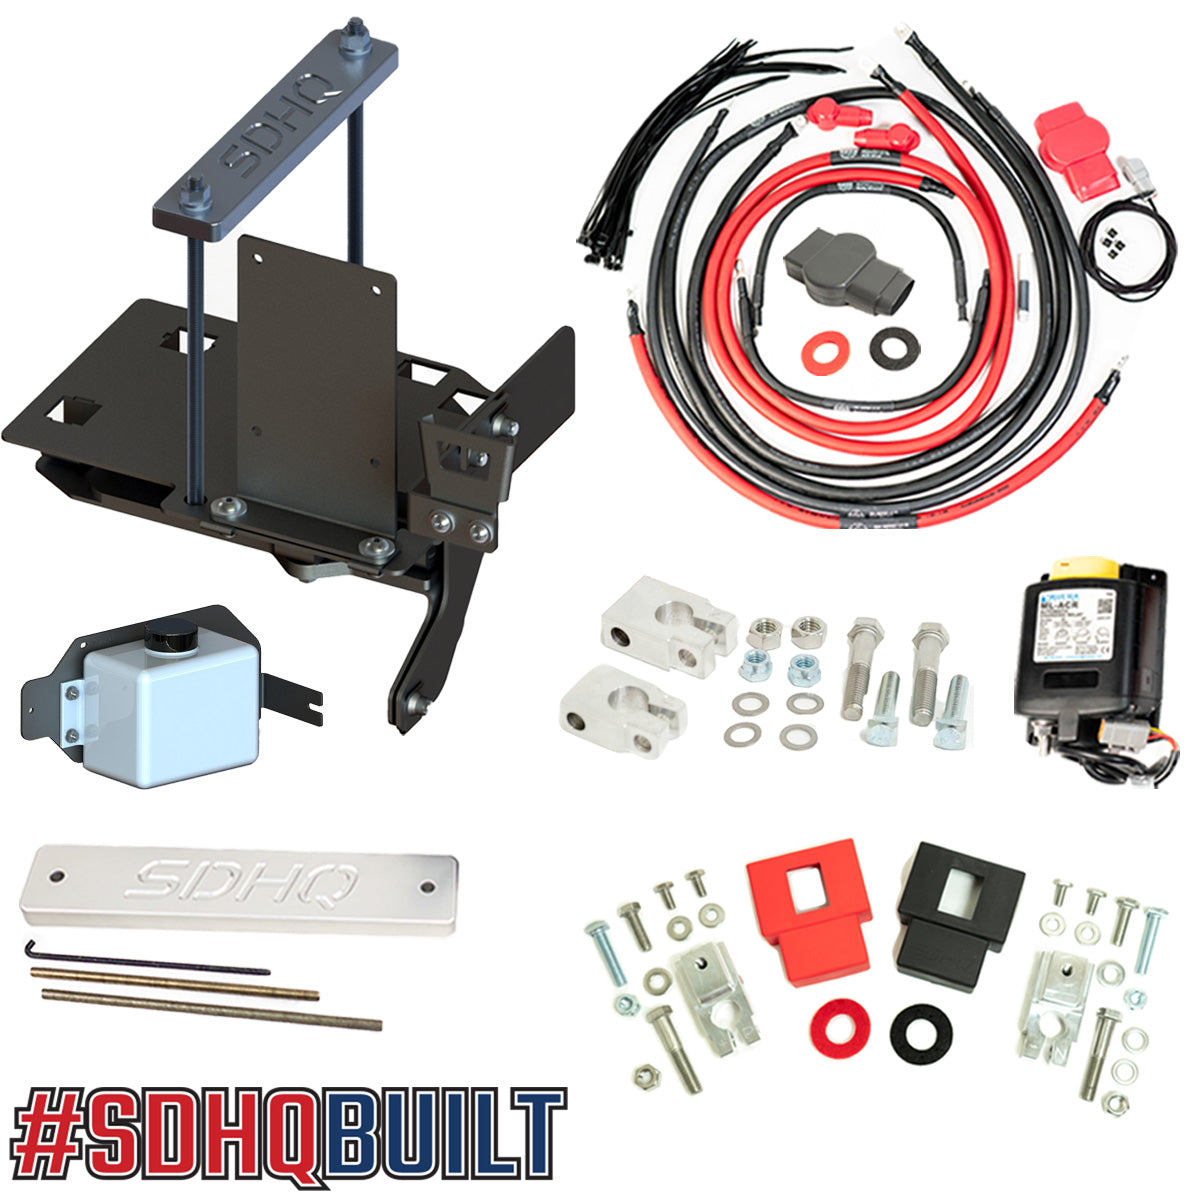 '07-21 Toyota Tundra SDHQ Built Complete Dual Battery Kit parts